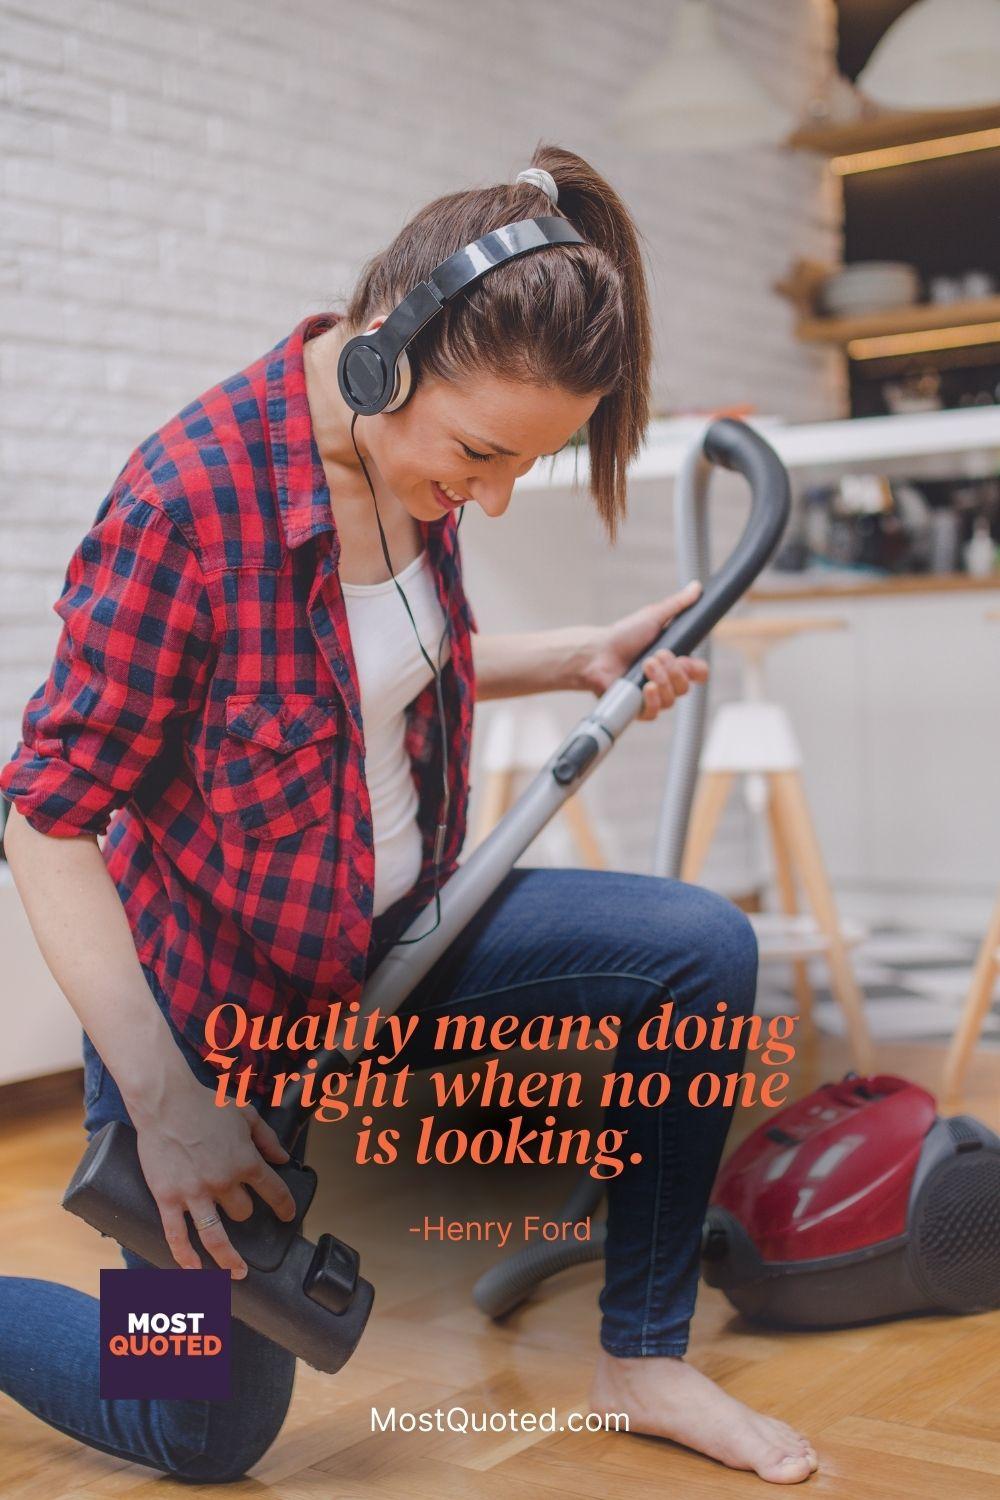 Quality means doing it right when no one is looking. - Henry Ford